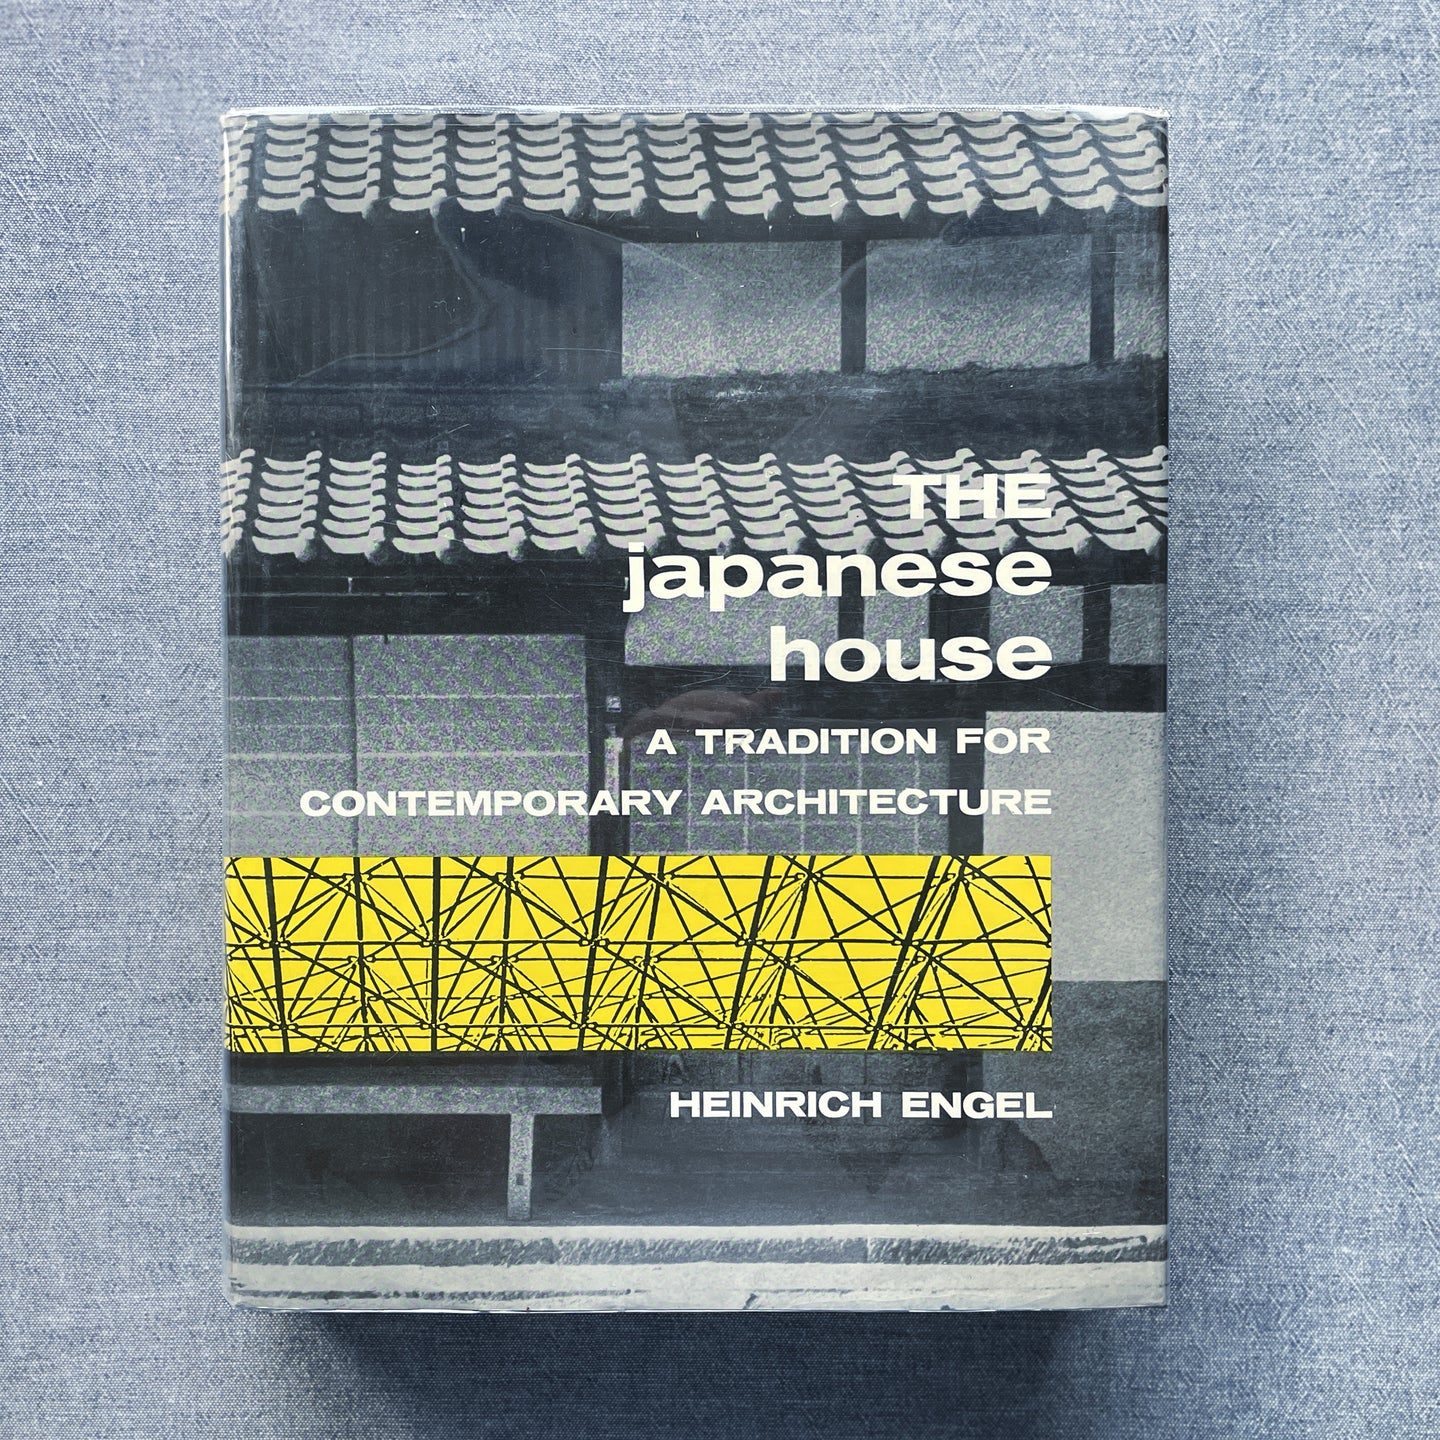 The Japanese House: A Tradition for Contemporary Architecture